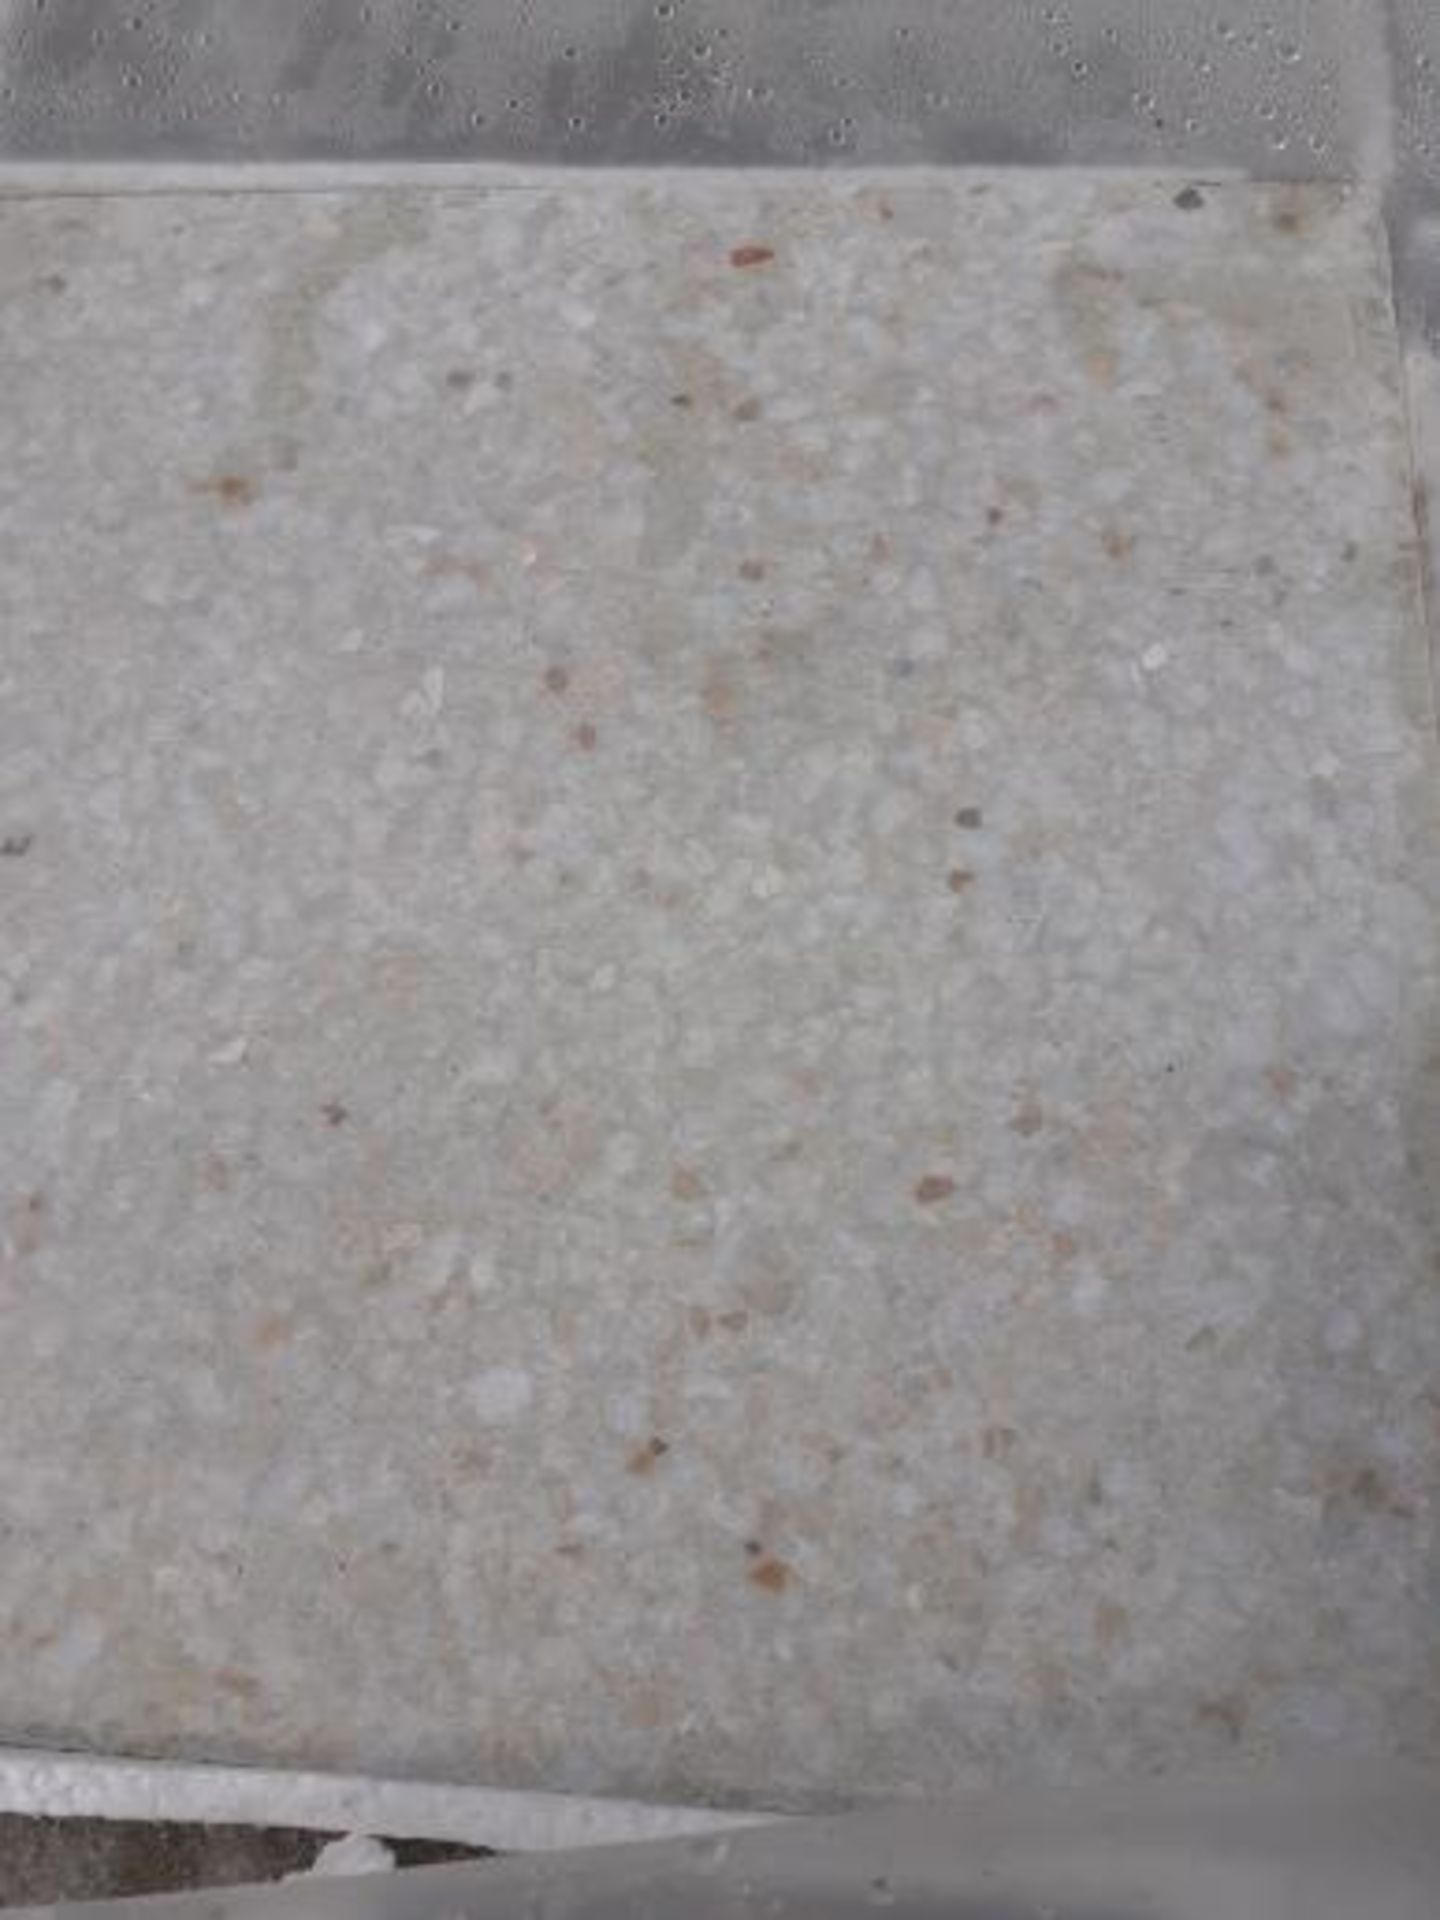 1 PALLET OF BRAND NEW TERRAZZO COMMERCIAL FLOOR TILES (Z30011), COVERS 24 SQUARE YARDS *PLUS VAT* - Image 9 of 15